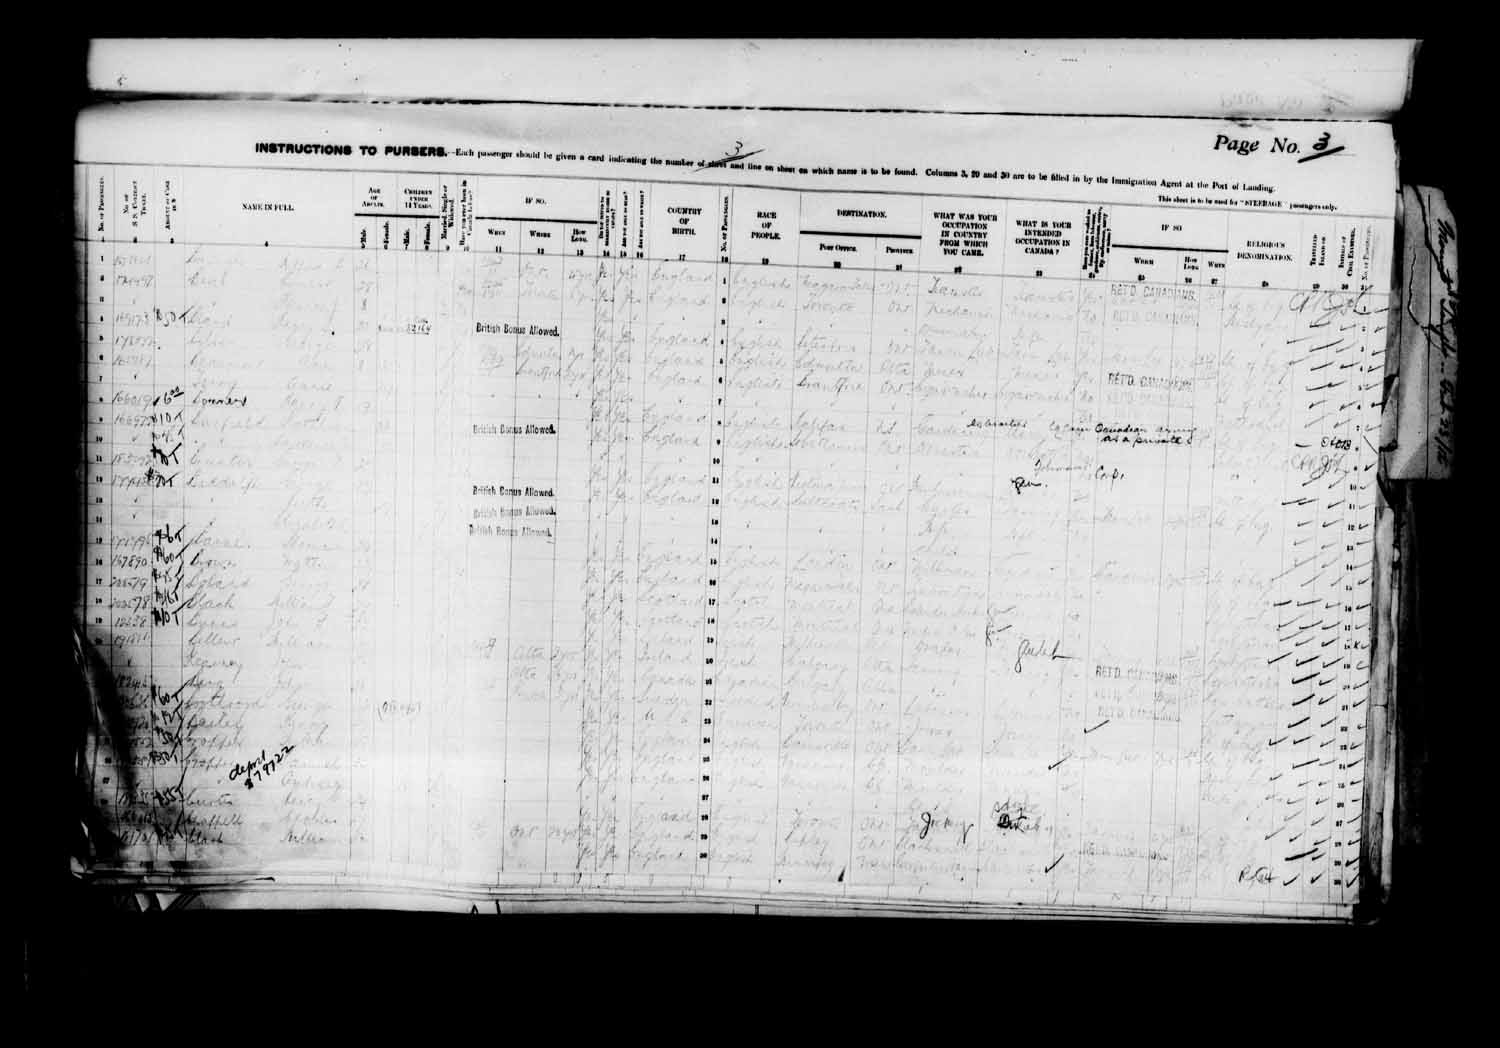 Digitized page of Passenger Lists for Image No.: e003627191